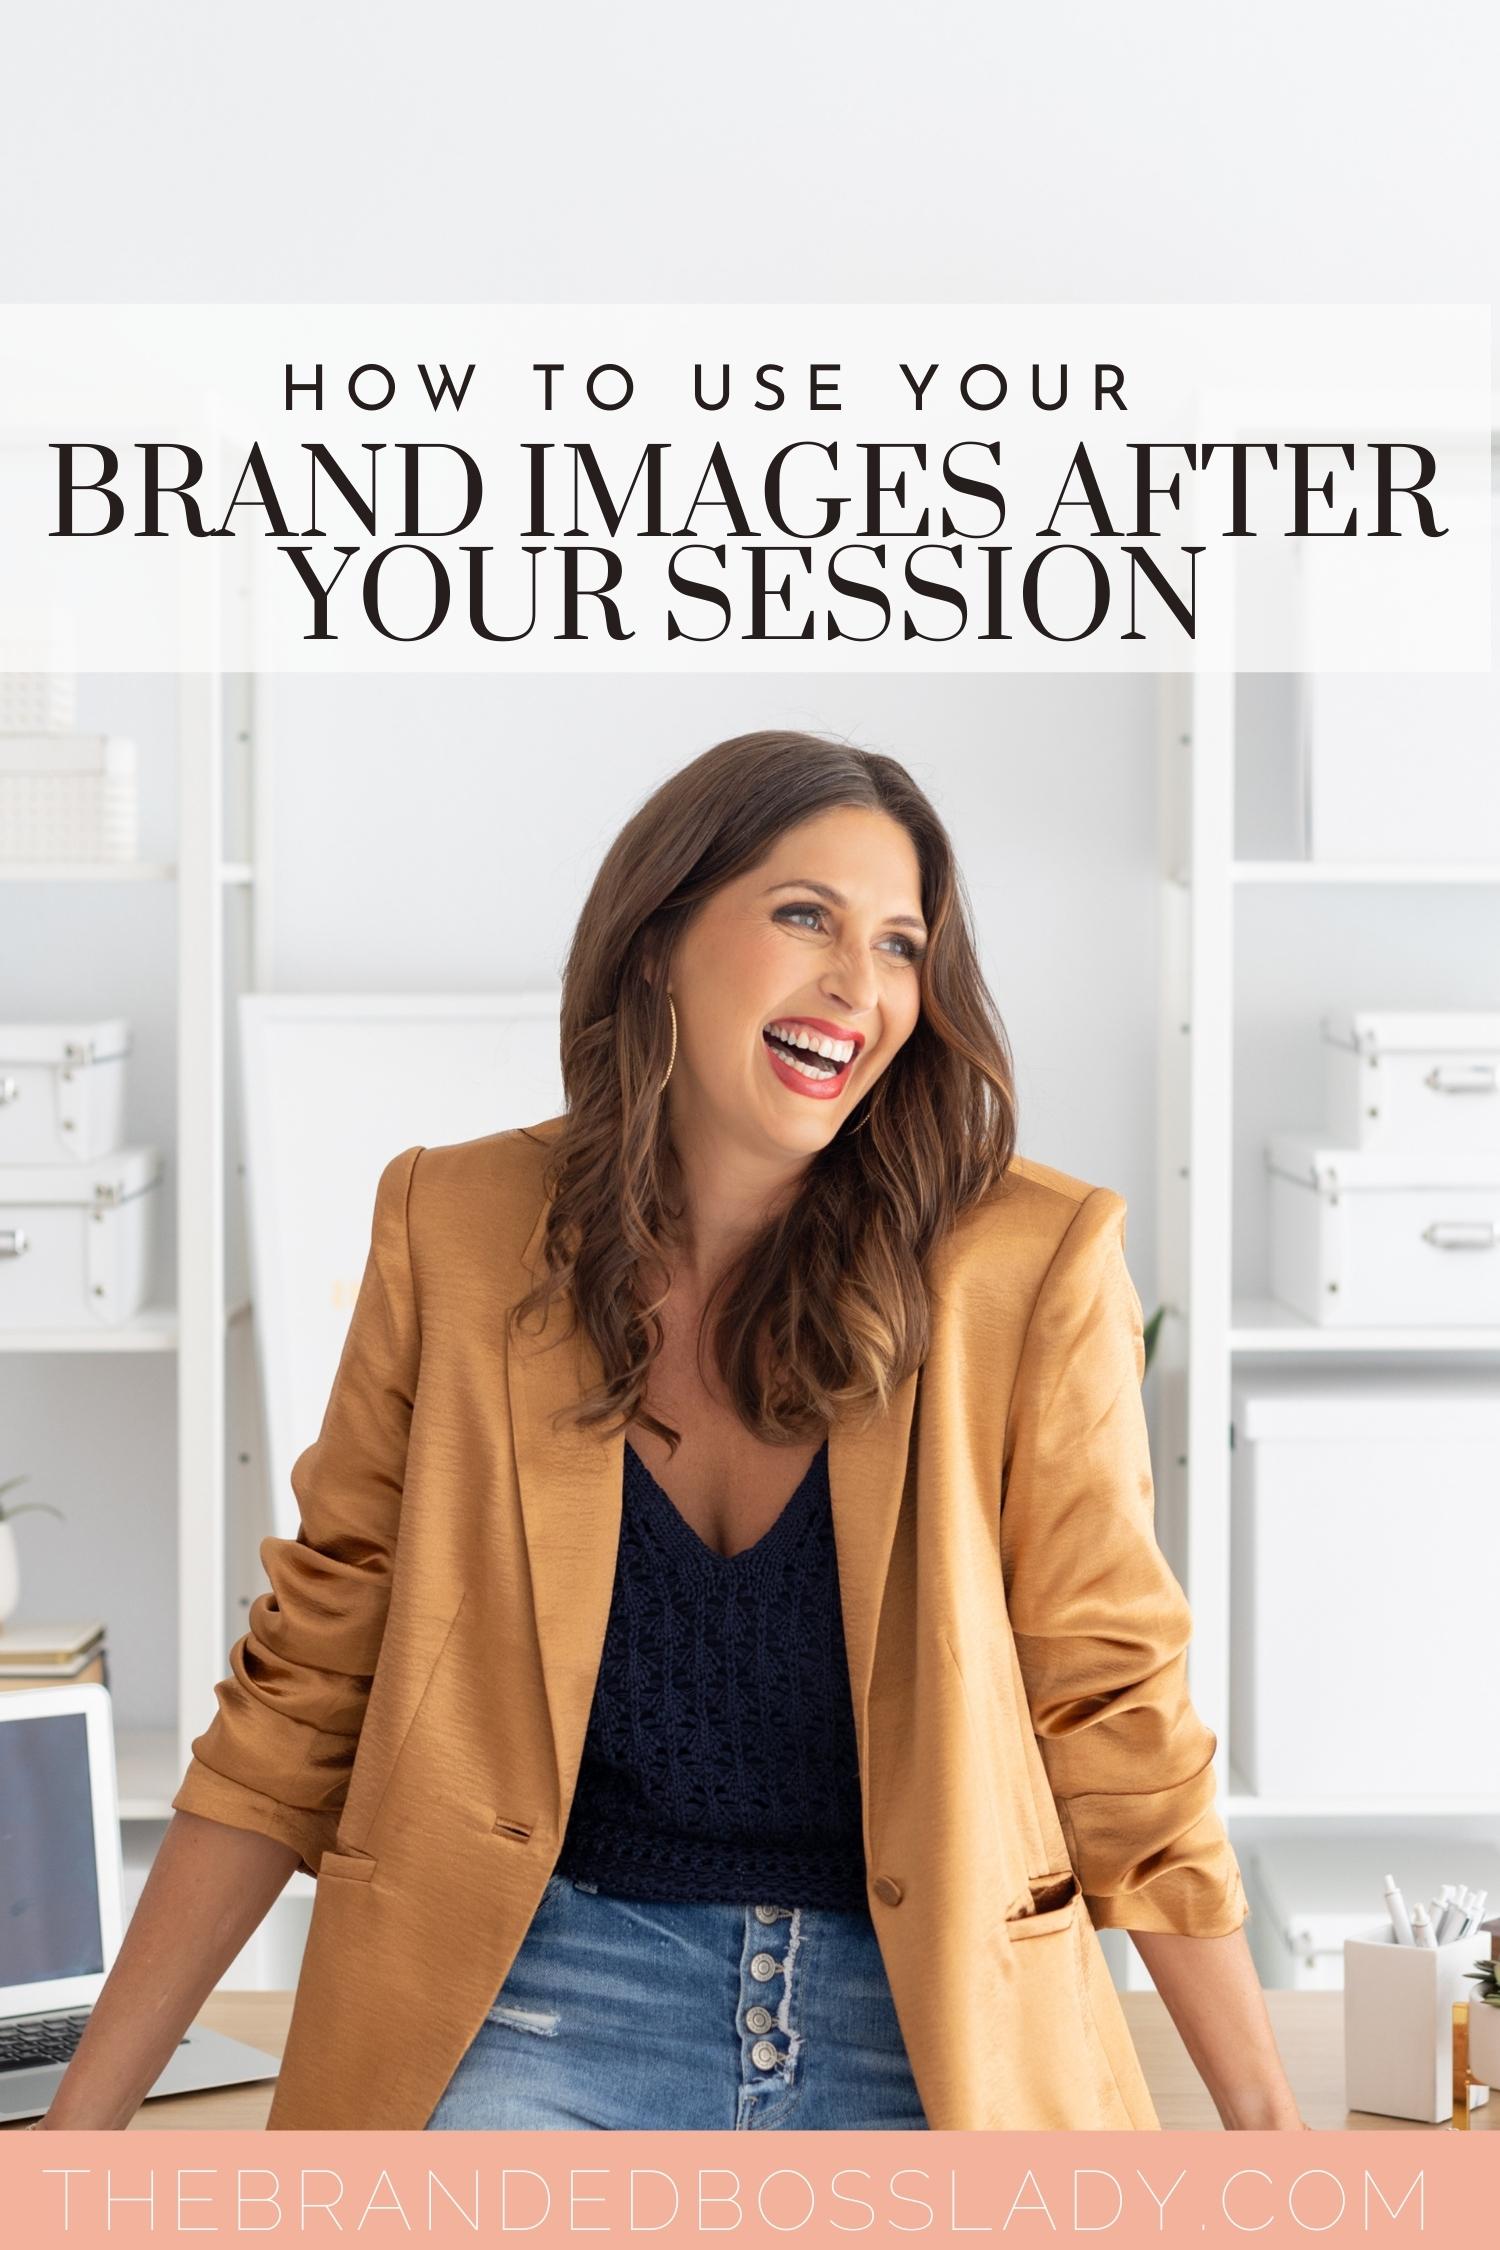 How to use your brand images after your session